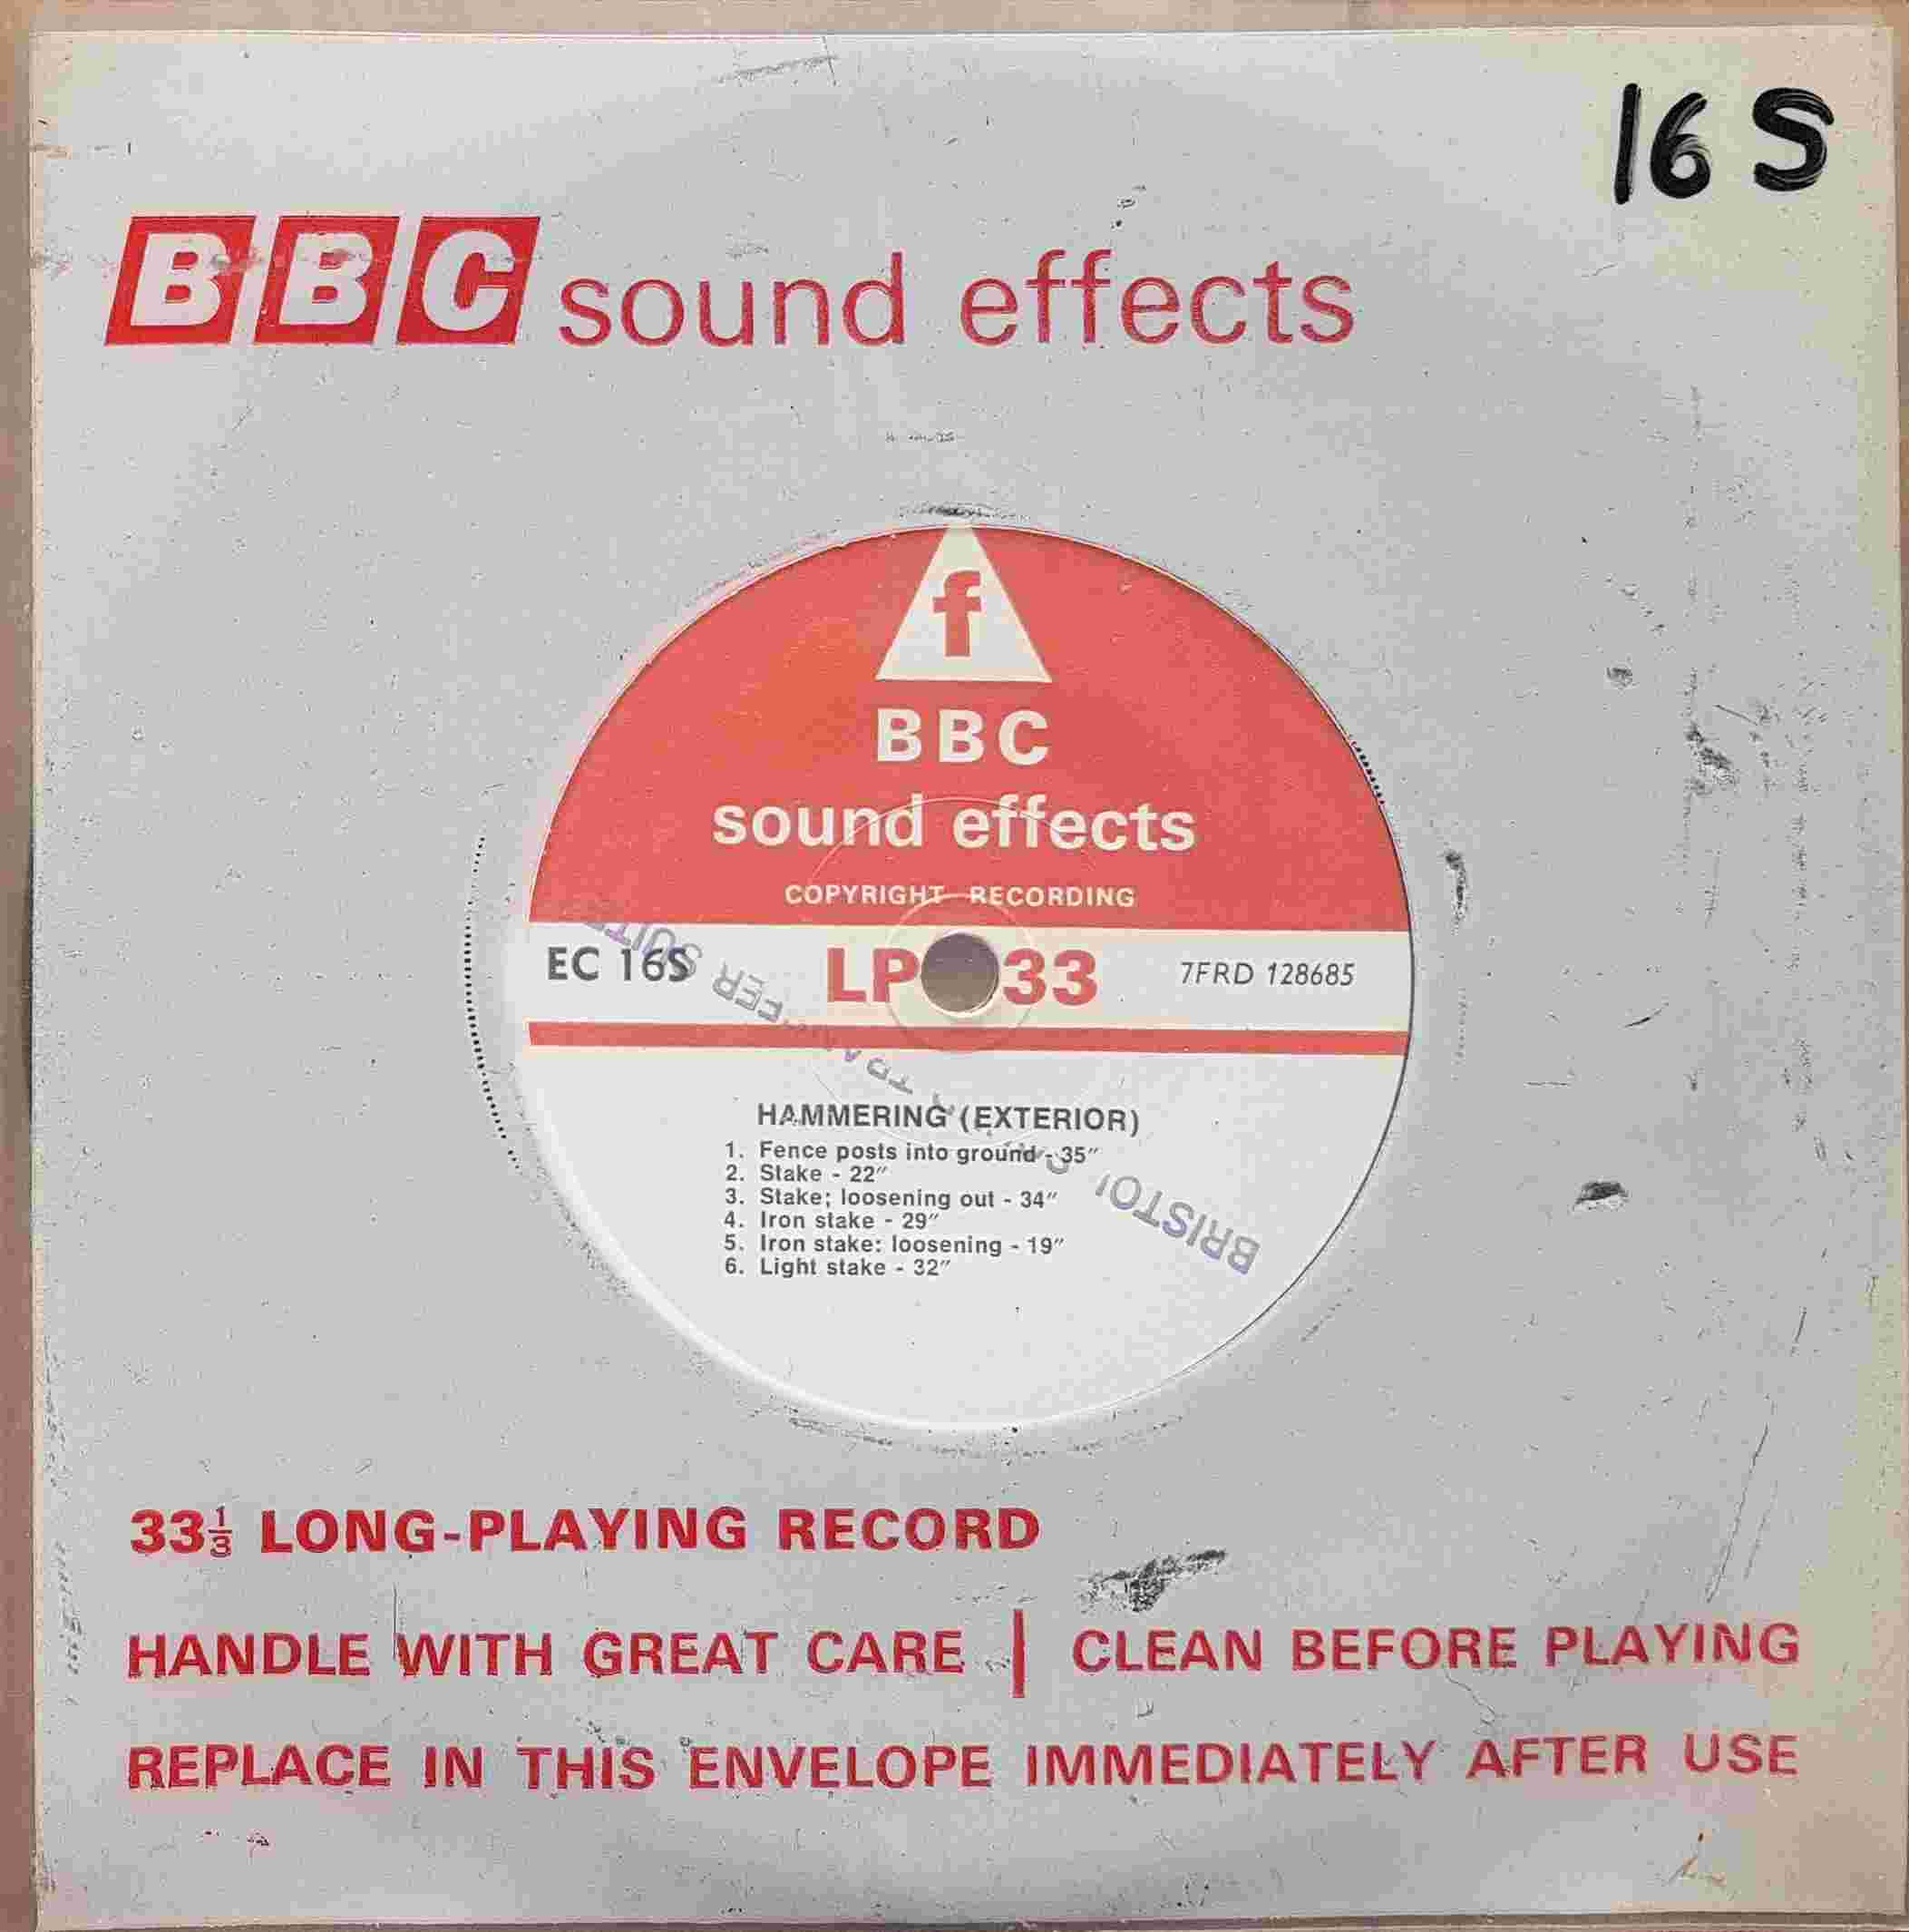 Picture of EC 16S Hammering (Exterior) by artist Not registered from the BBC records and Tapes library